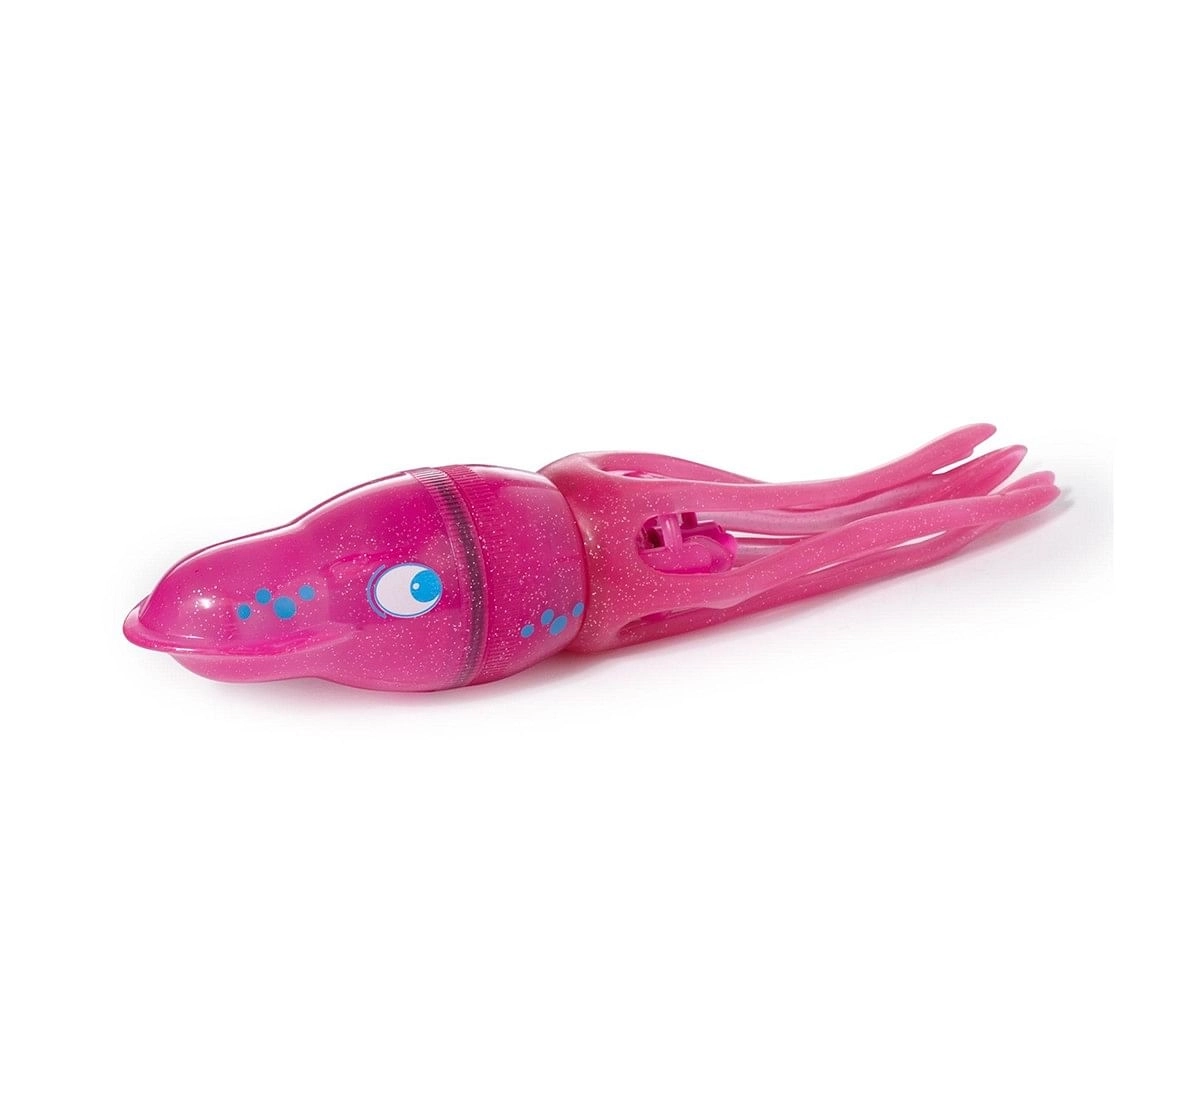  Hamleys Squiddy (Assorted Color) Bath Toys & Accessories for Kids age 3Y+ 